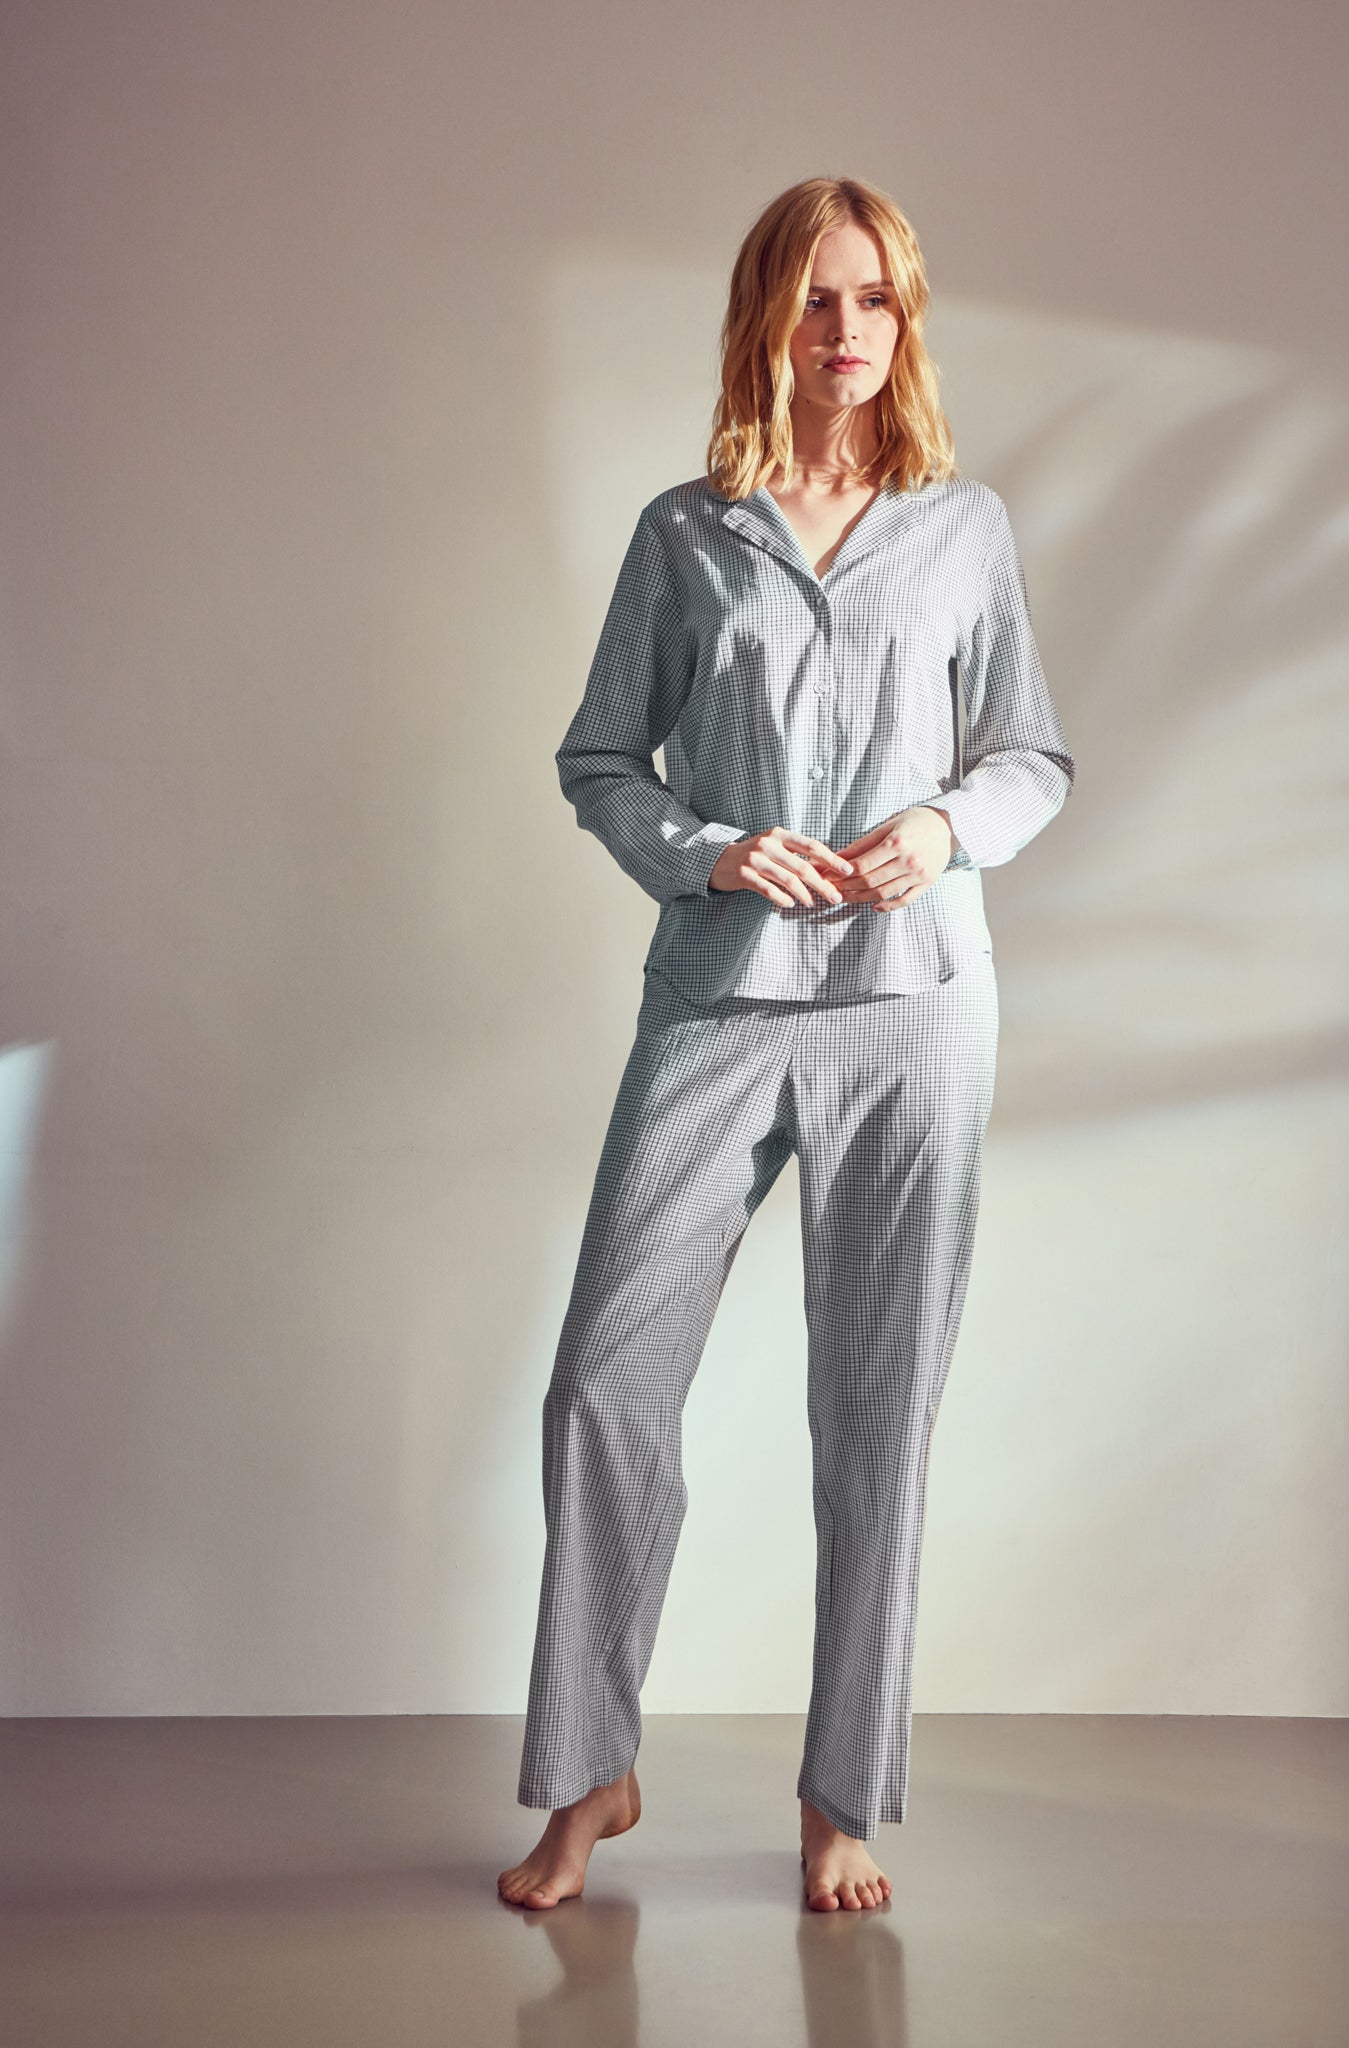 Sustainable, hand woven cotton pyjamas. Ethical, luxury nightwear which is essential for today's conscious consumer. We support women weavers in India by buying their handloom cotton and supporting traditional craftsmanship. 